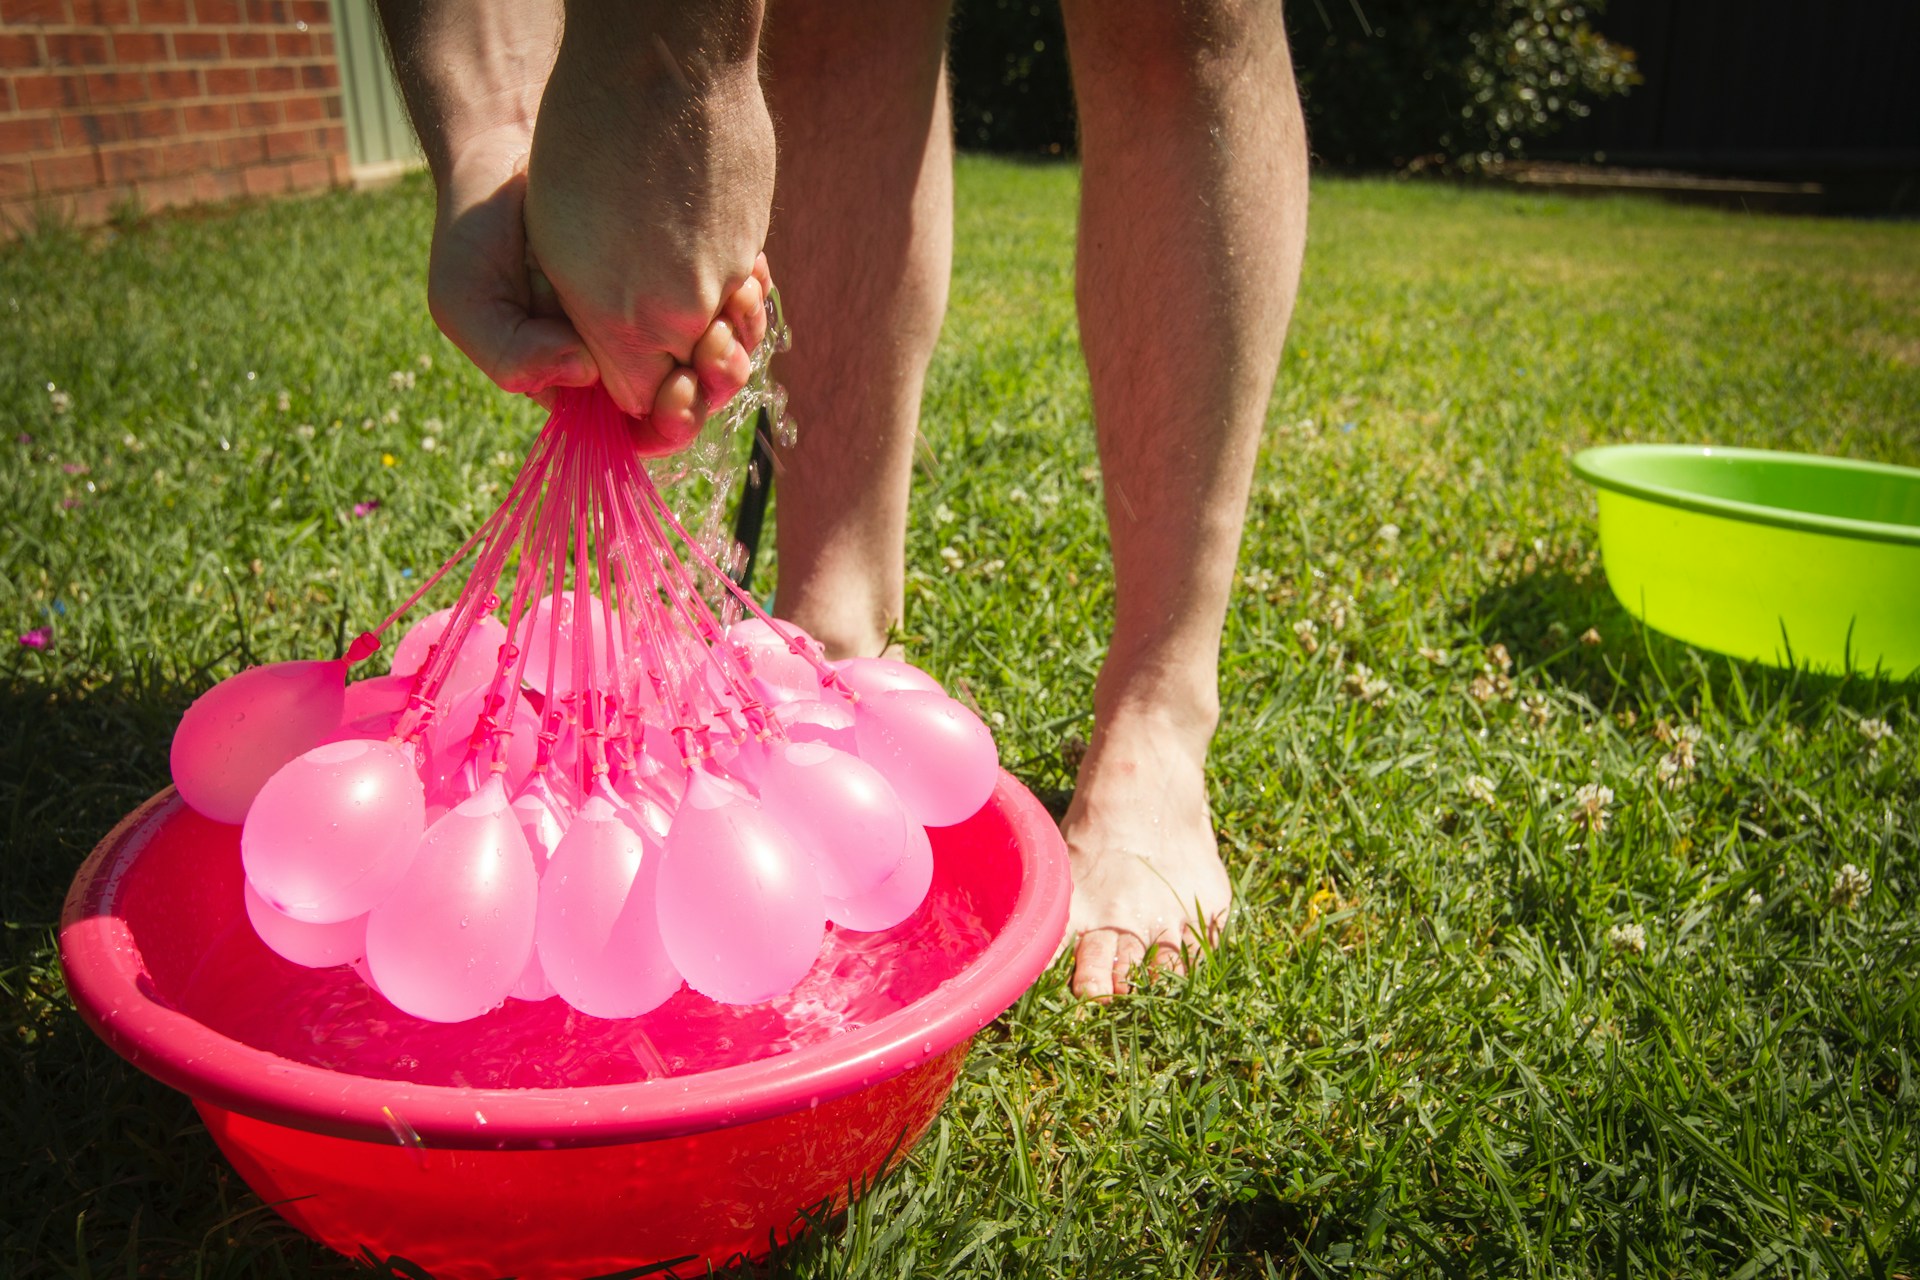 Water ballons fights is a great outdoor party game